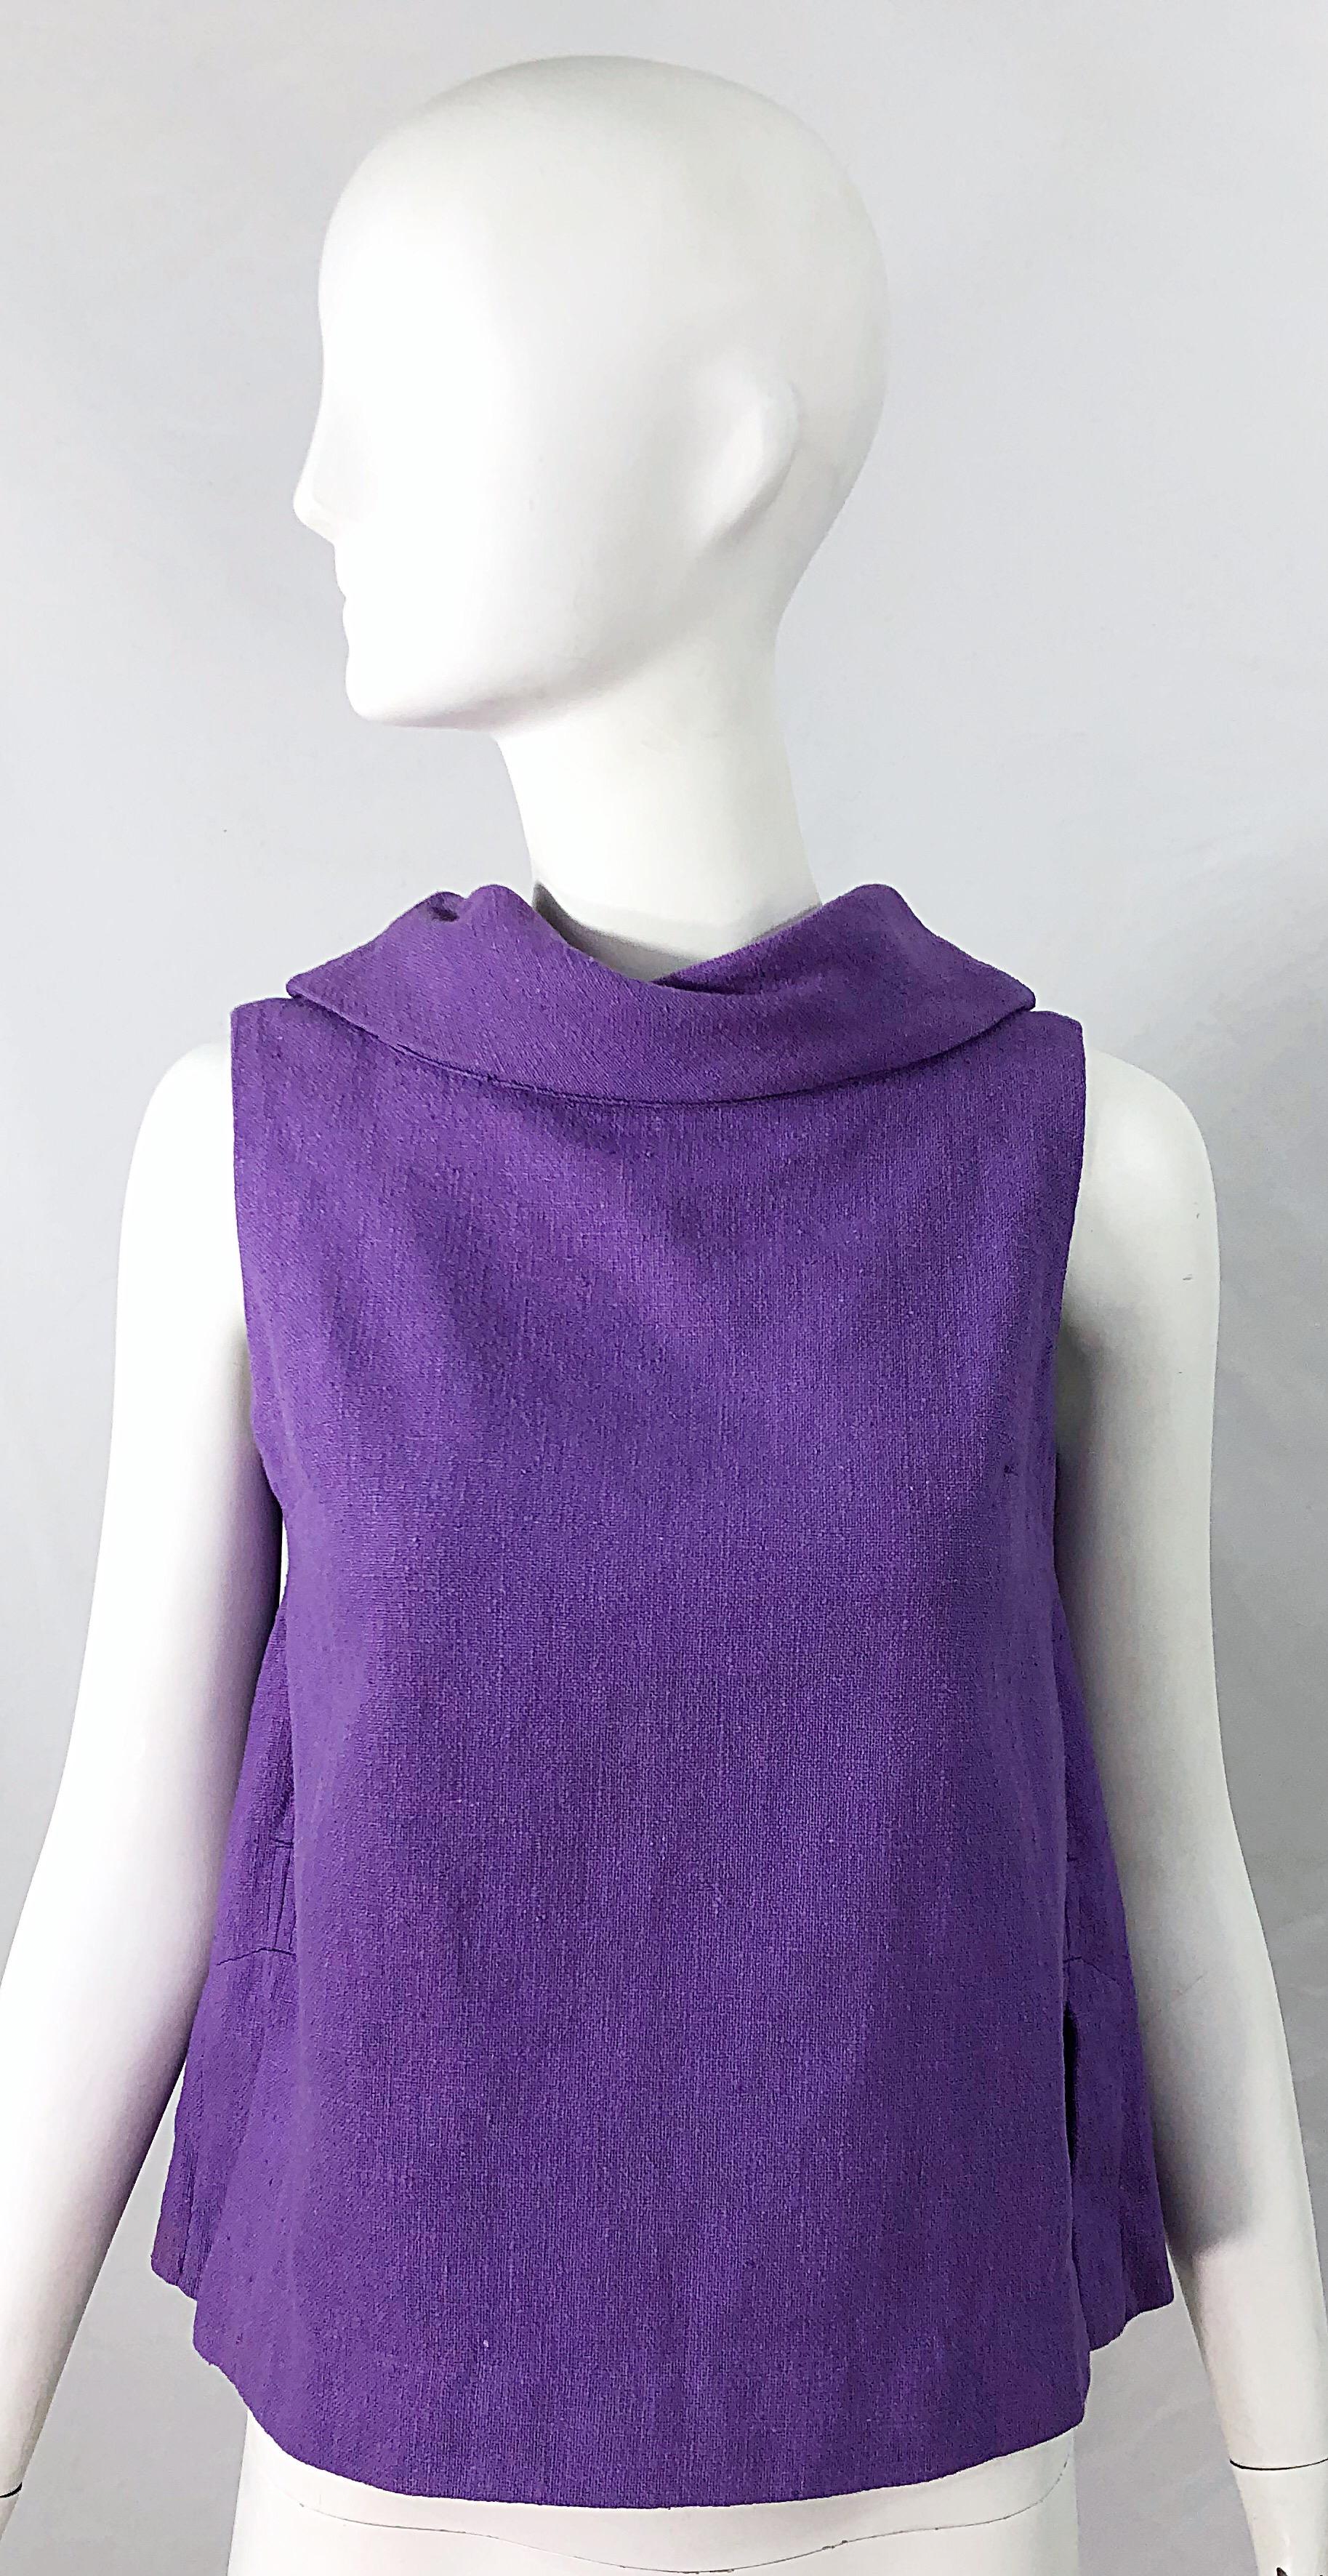 Chic 1960s purple linen empire waist A-Line sleeveless top ! Features the perfect shade of medium purple. Flattering high mock neck. Beautiful pleating details on the back. Simply slips over the head. Can easily be dressed up or down. Great with